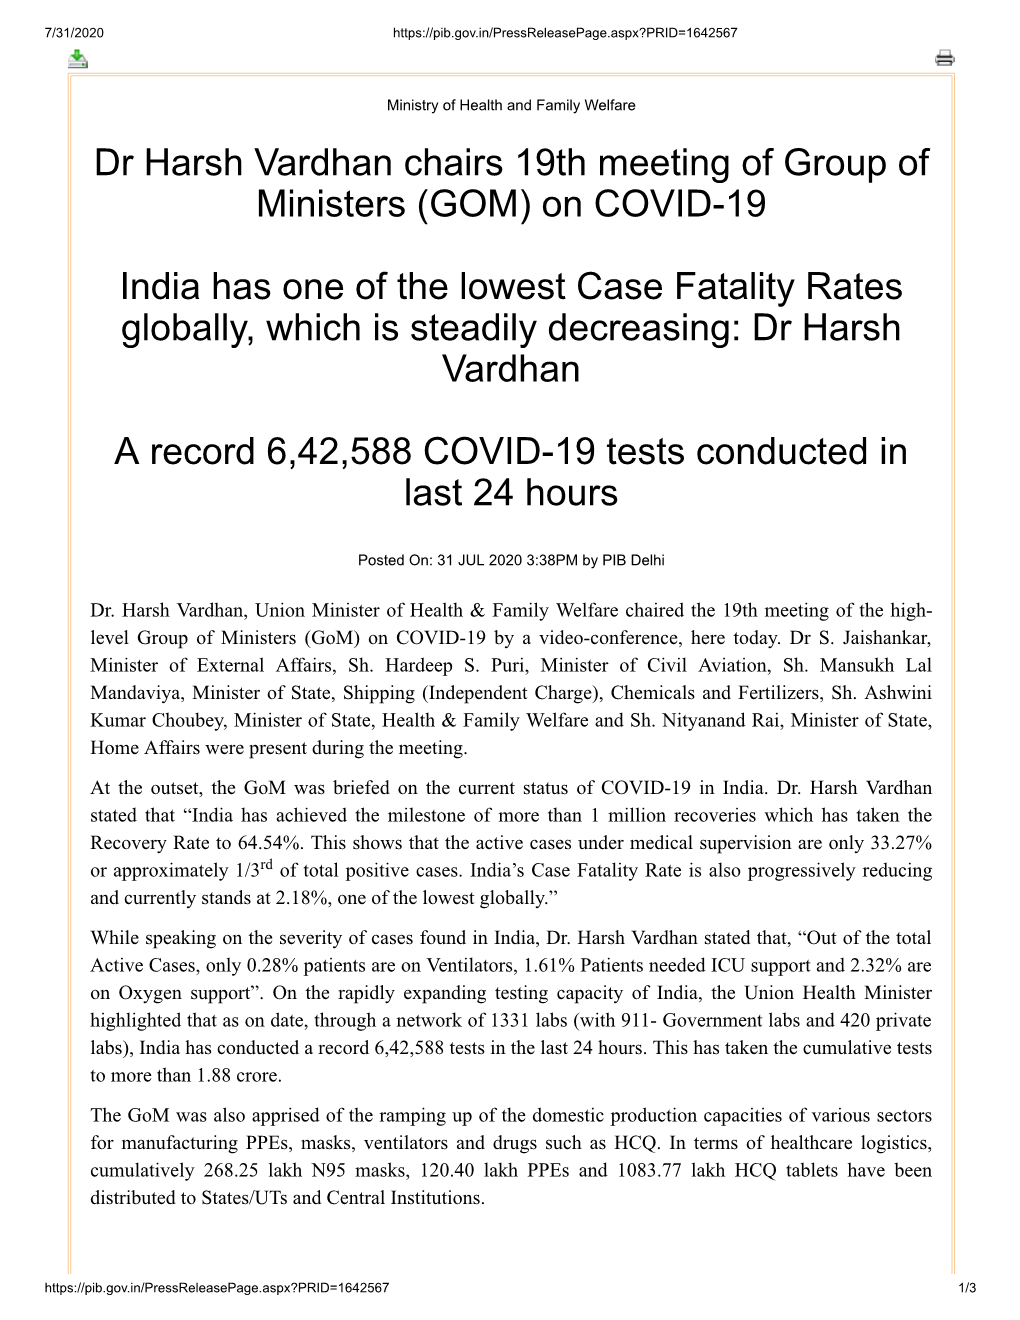 Dr Harsh Vardhan Chairs 19Th Meeting of Group of Ministers (GOM) on COVID-19